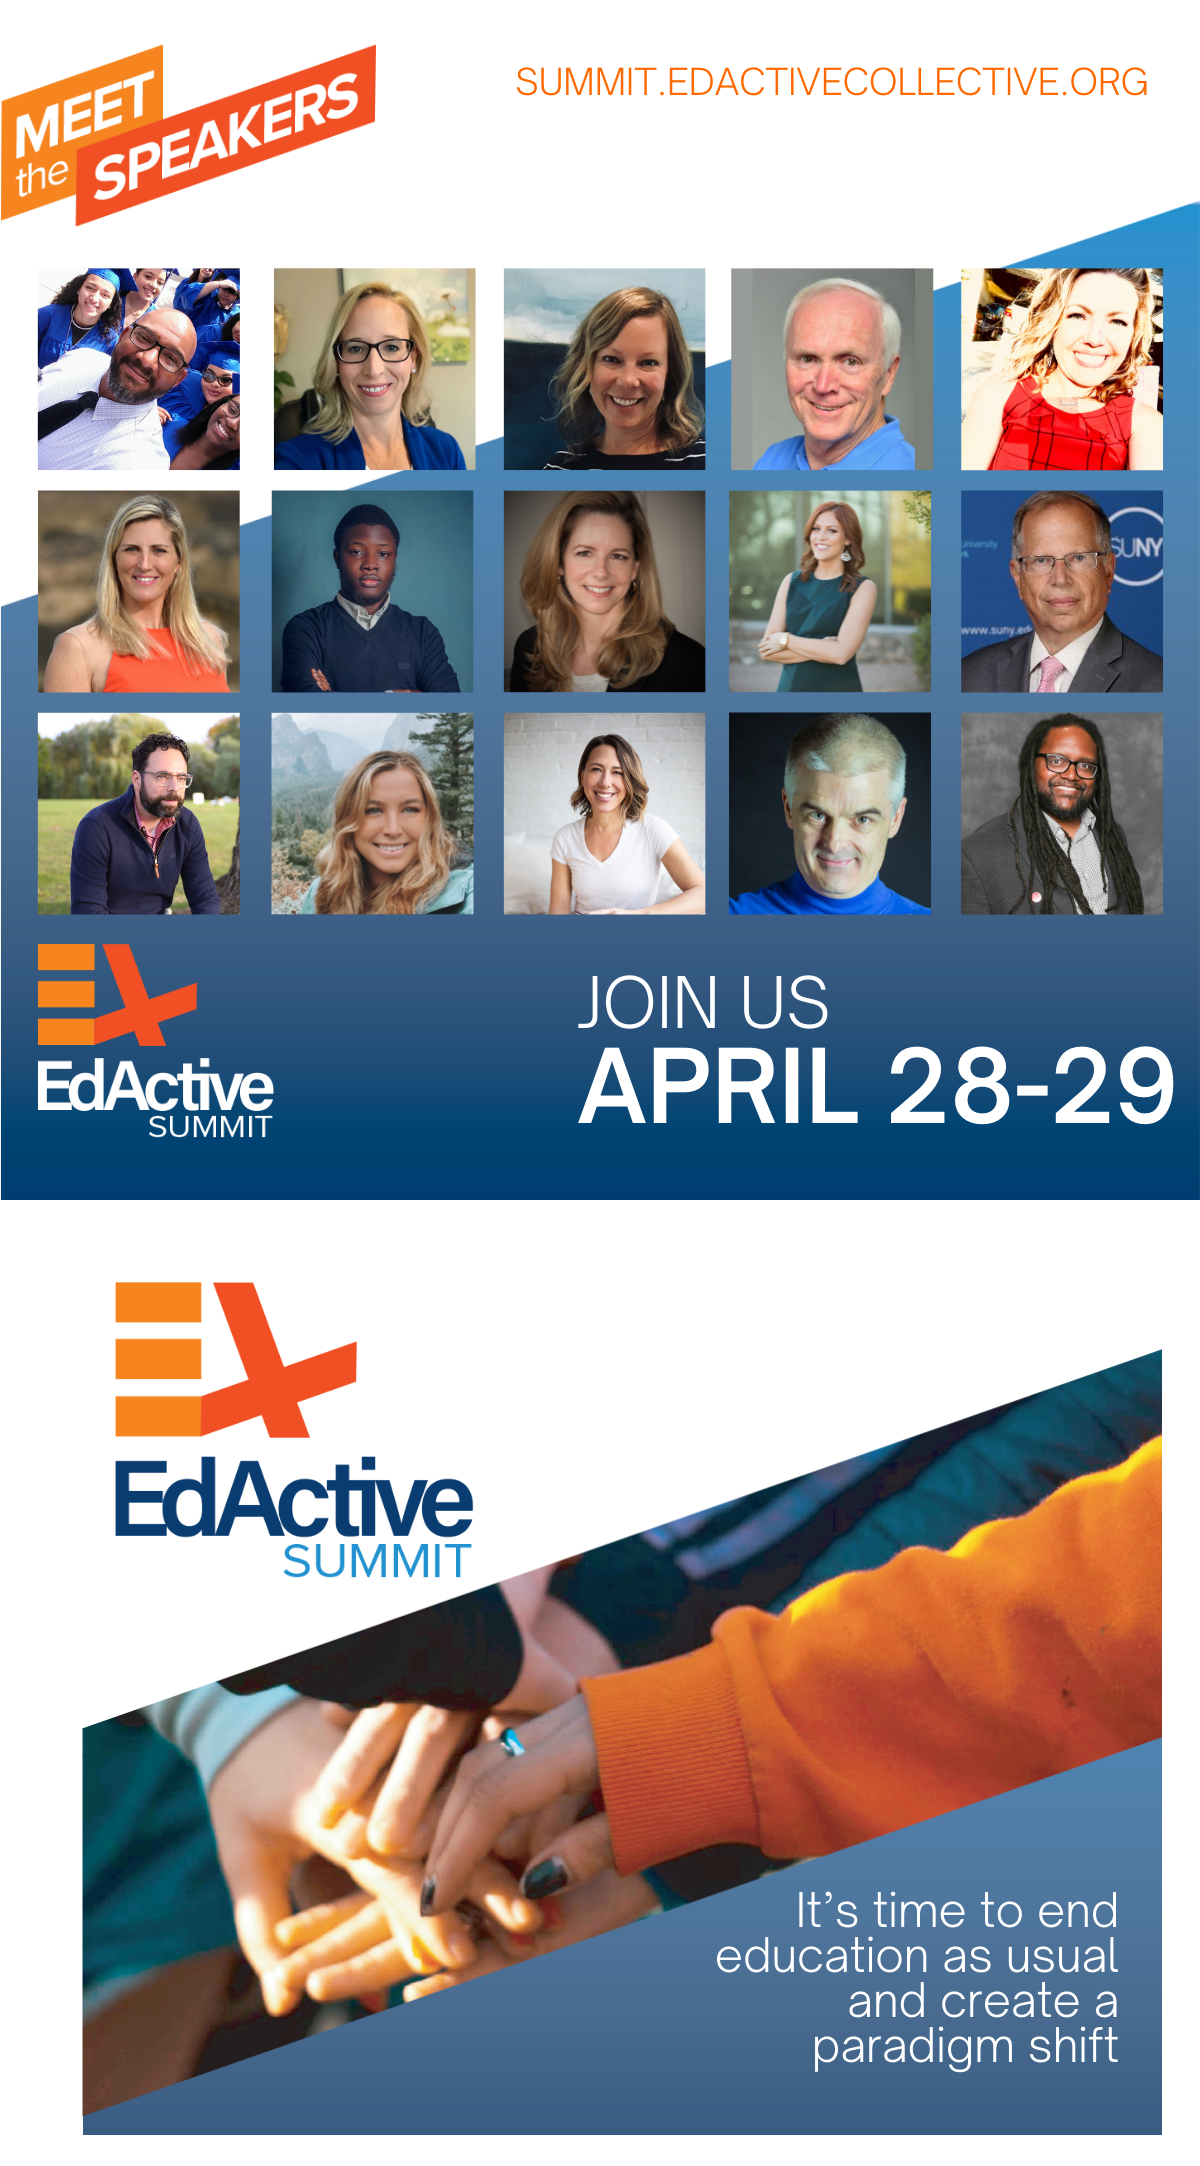 The headshots of the EdActive Summit Speakers are posted with a logo for the April 28-29 2022 Summit